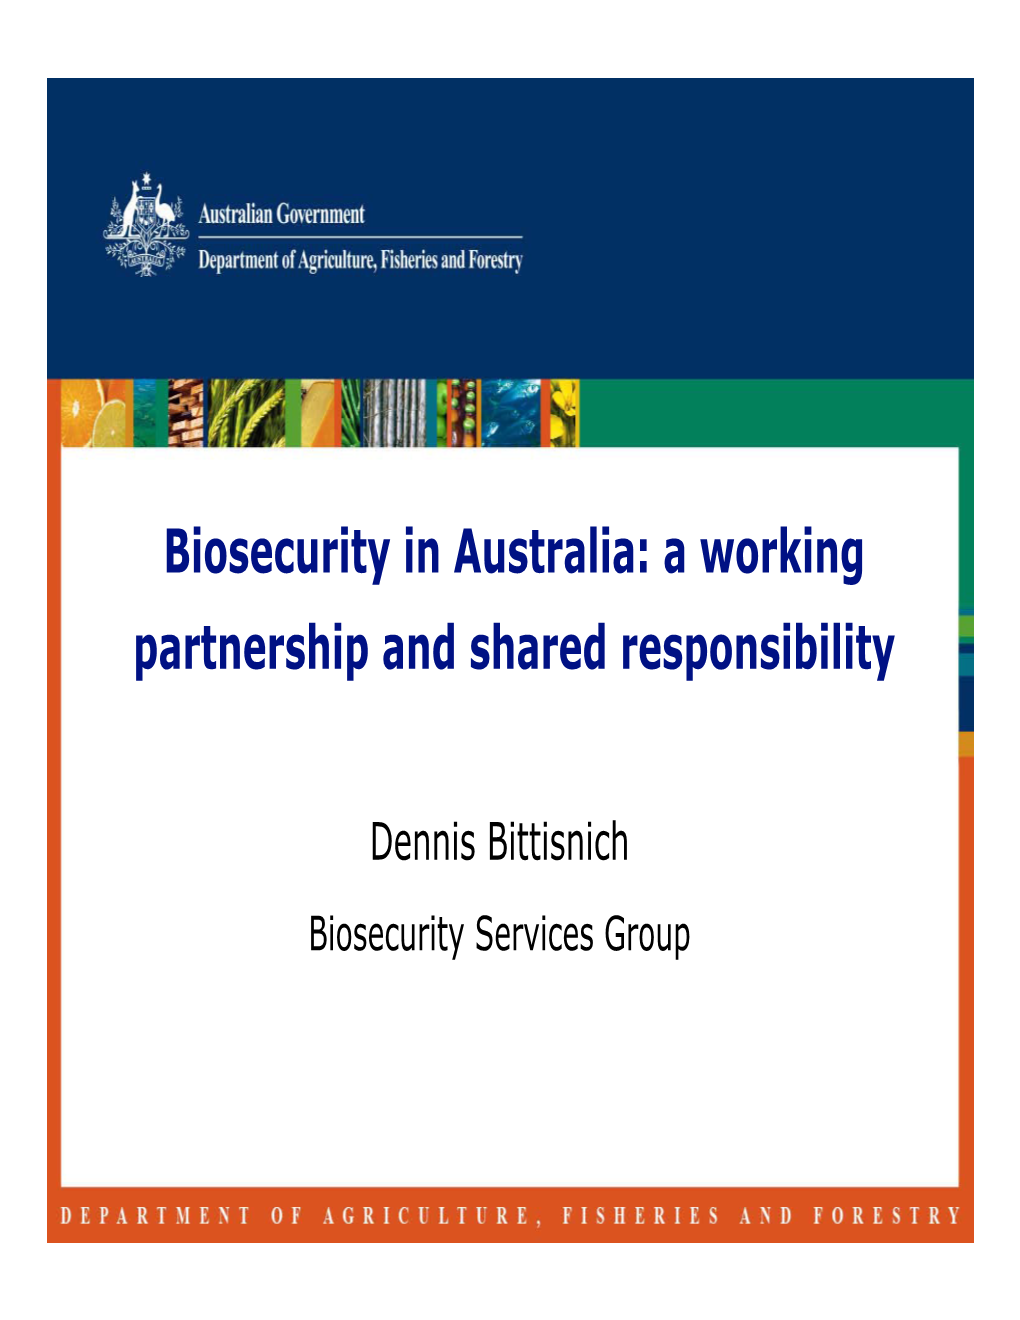 Biosecurity in Australia: a Working Partnership and Shared Responsibility